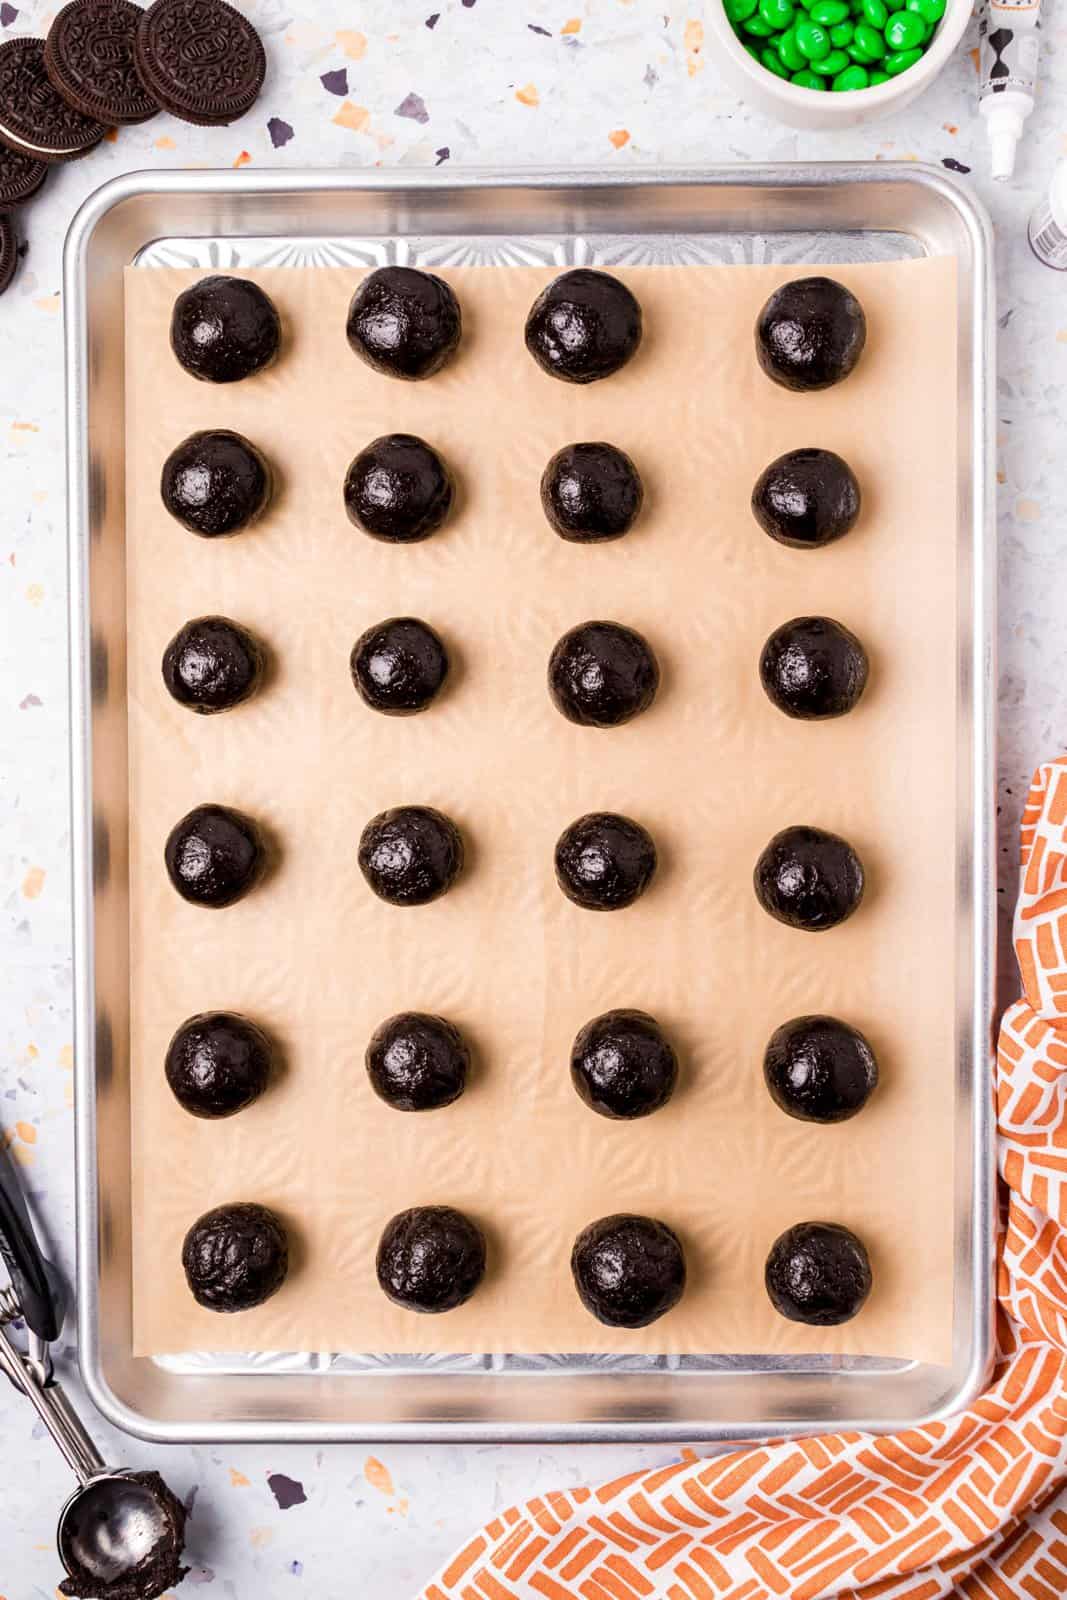 Rounded balls placed on parchment lined baking sheet.